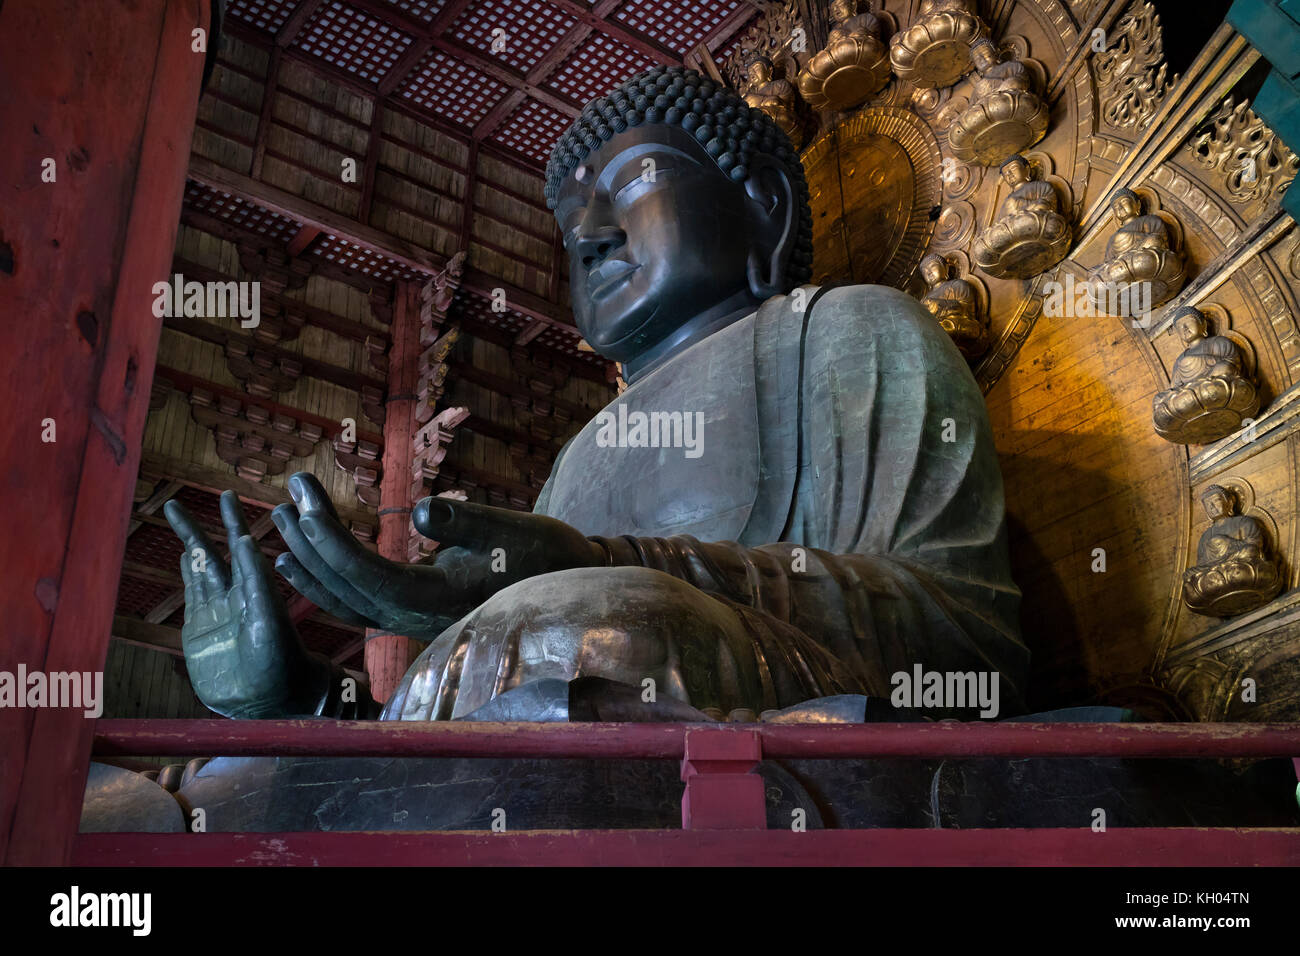 Nara, Japan -  May 29, 2017: The world's largest bronze statue of Buddha in the Great Buddha Hal, Daibutsuden Stock Photo